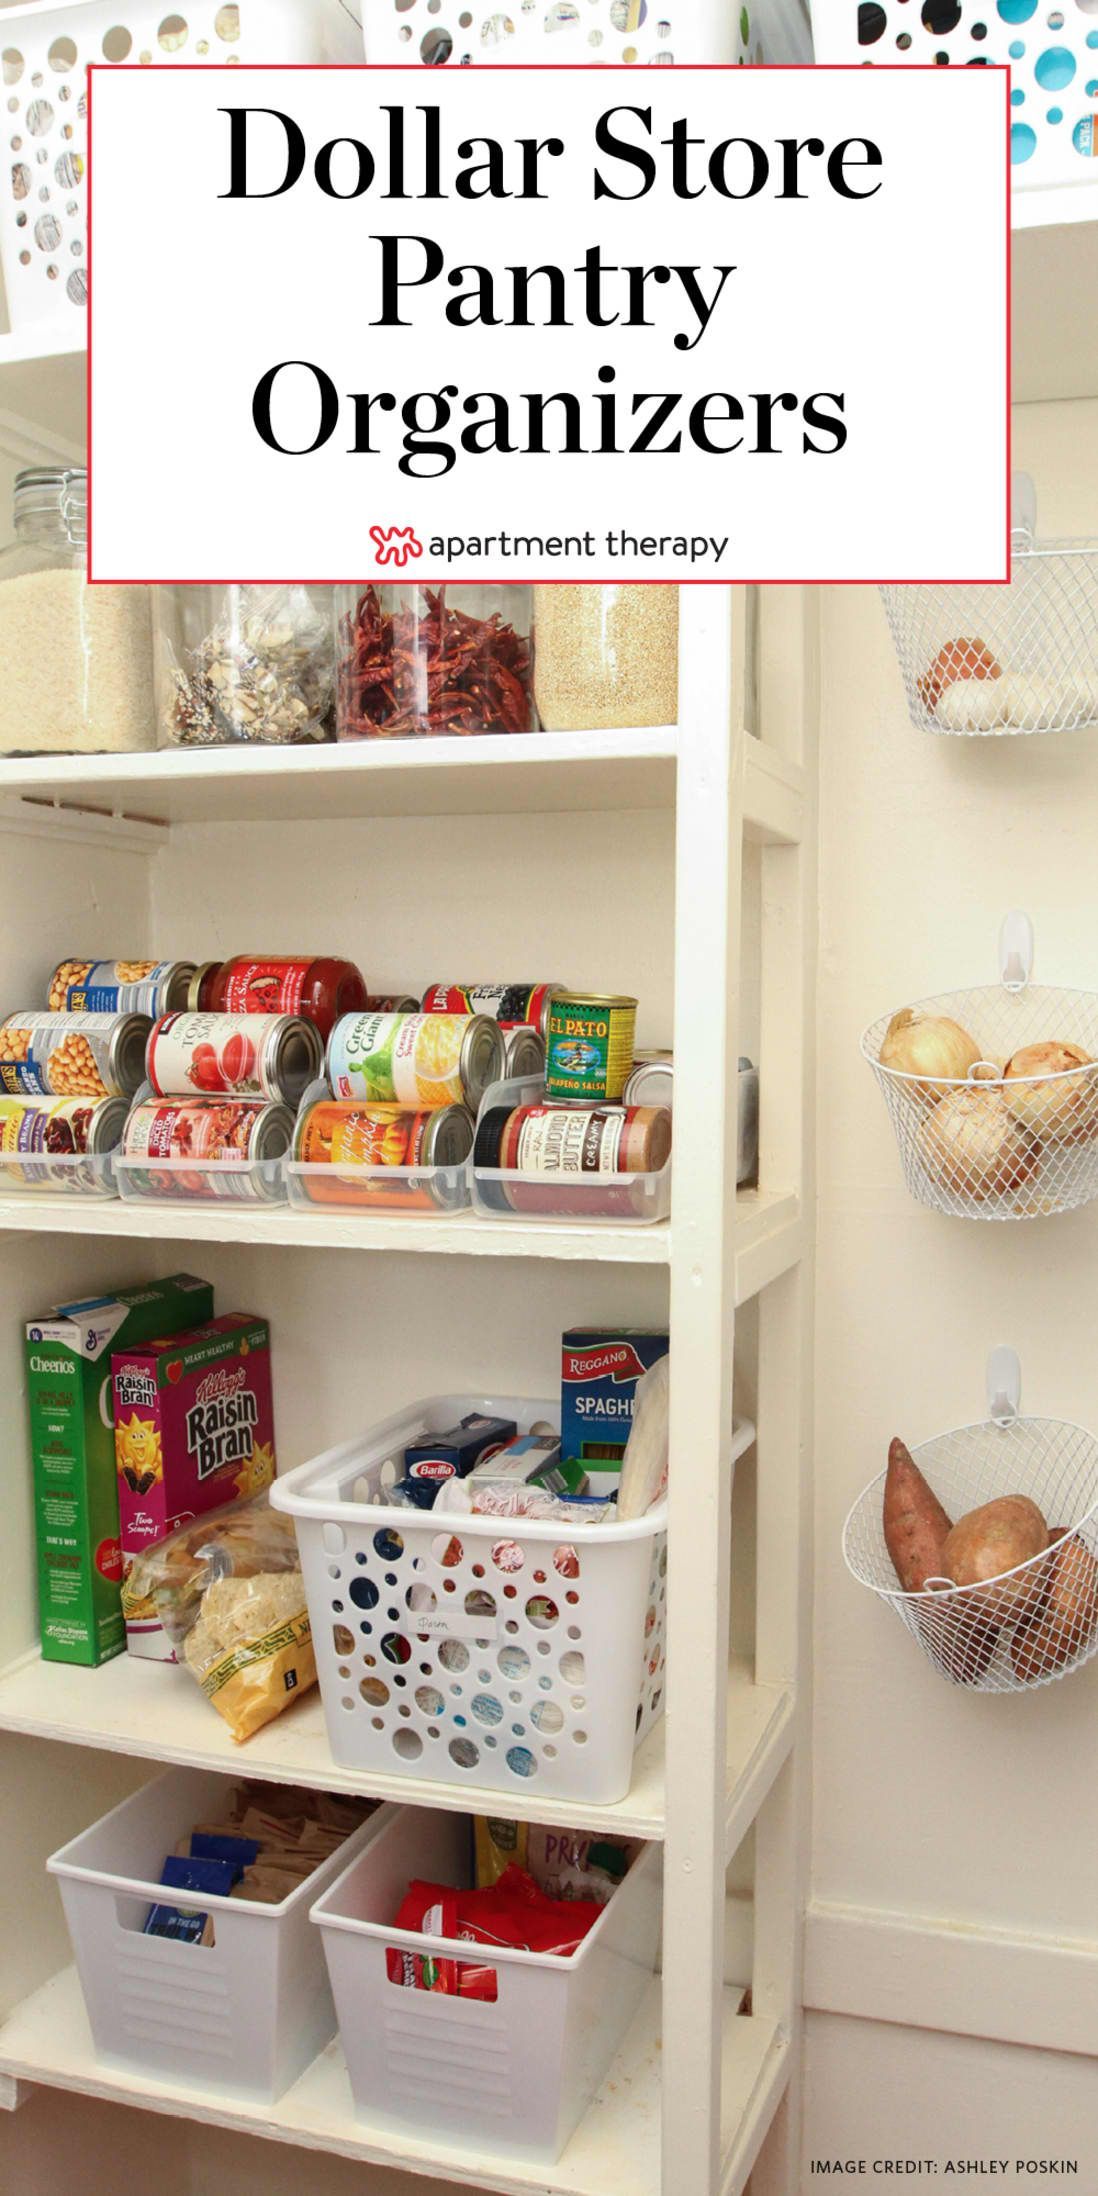 I Hacked My Messy Pantry Using Only Stuff From the Dollar Store - I Hacked My Messy Pantry Using Only Stuff From the Dollar Store -   17 diy Apartment pantry ideas